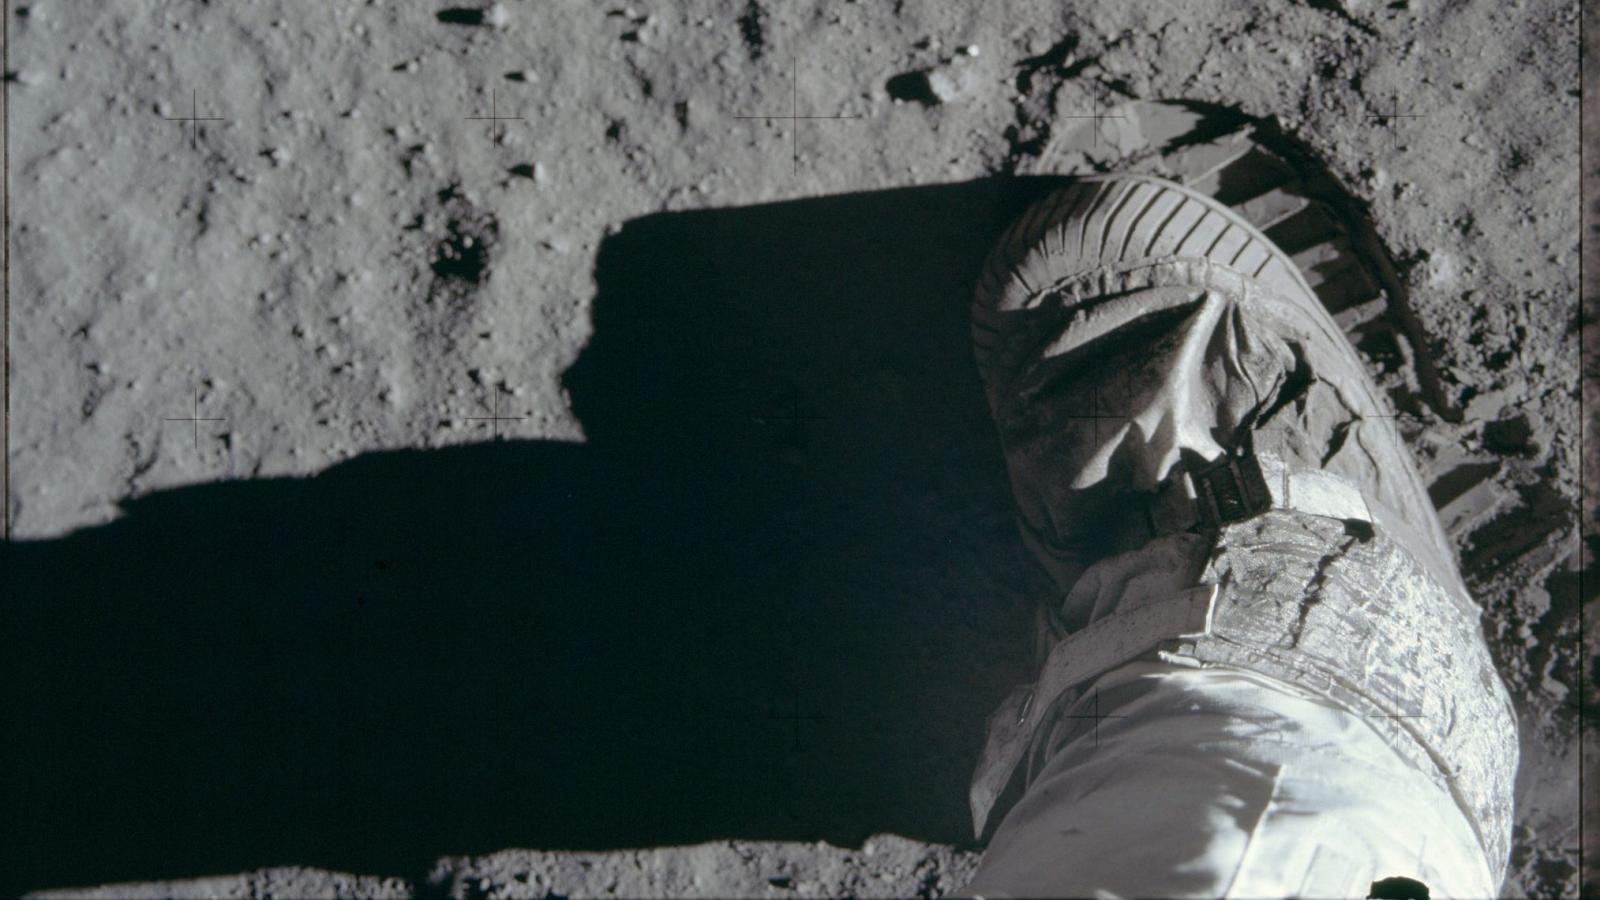 Extremely High Res Outtakes From Apollo 11's 1969 Moon Landing